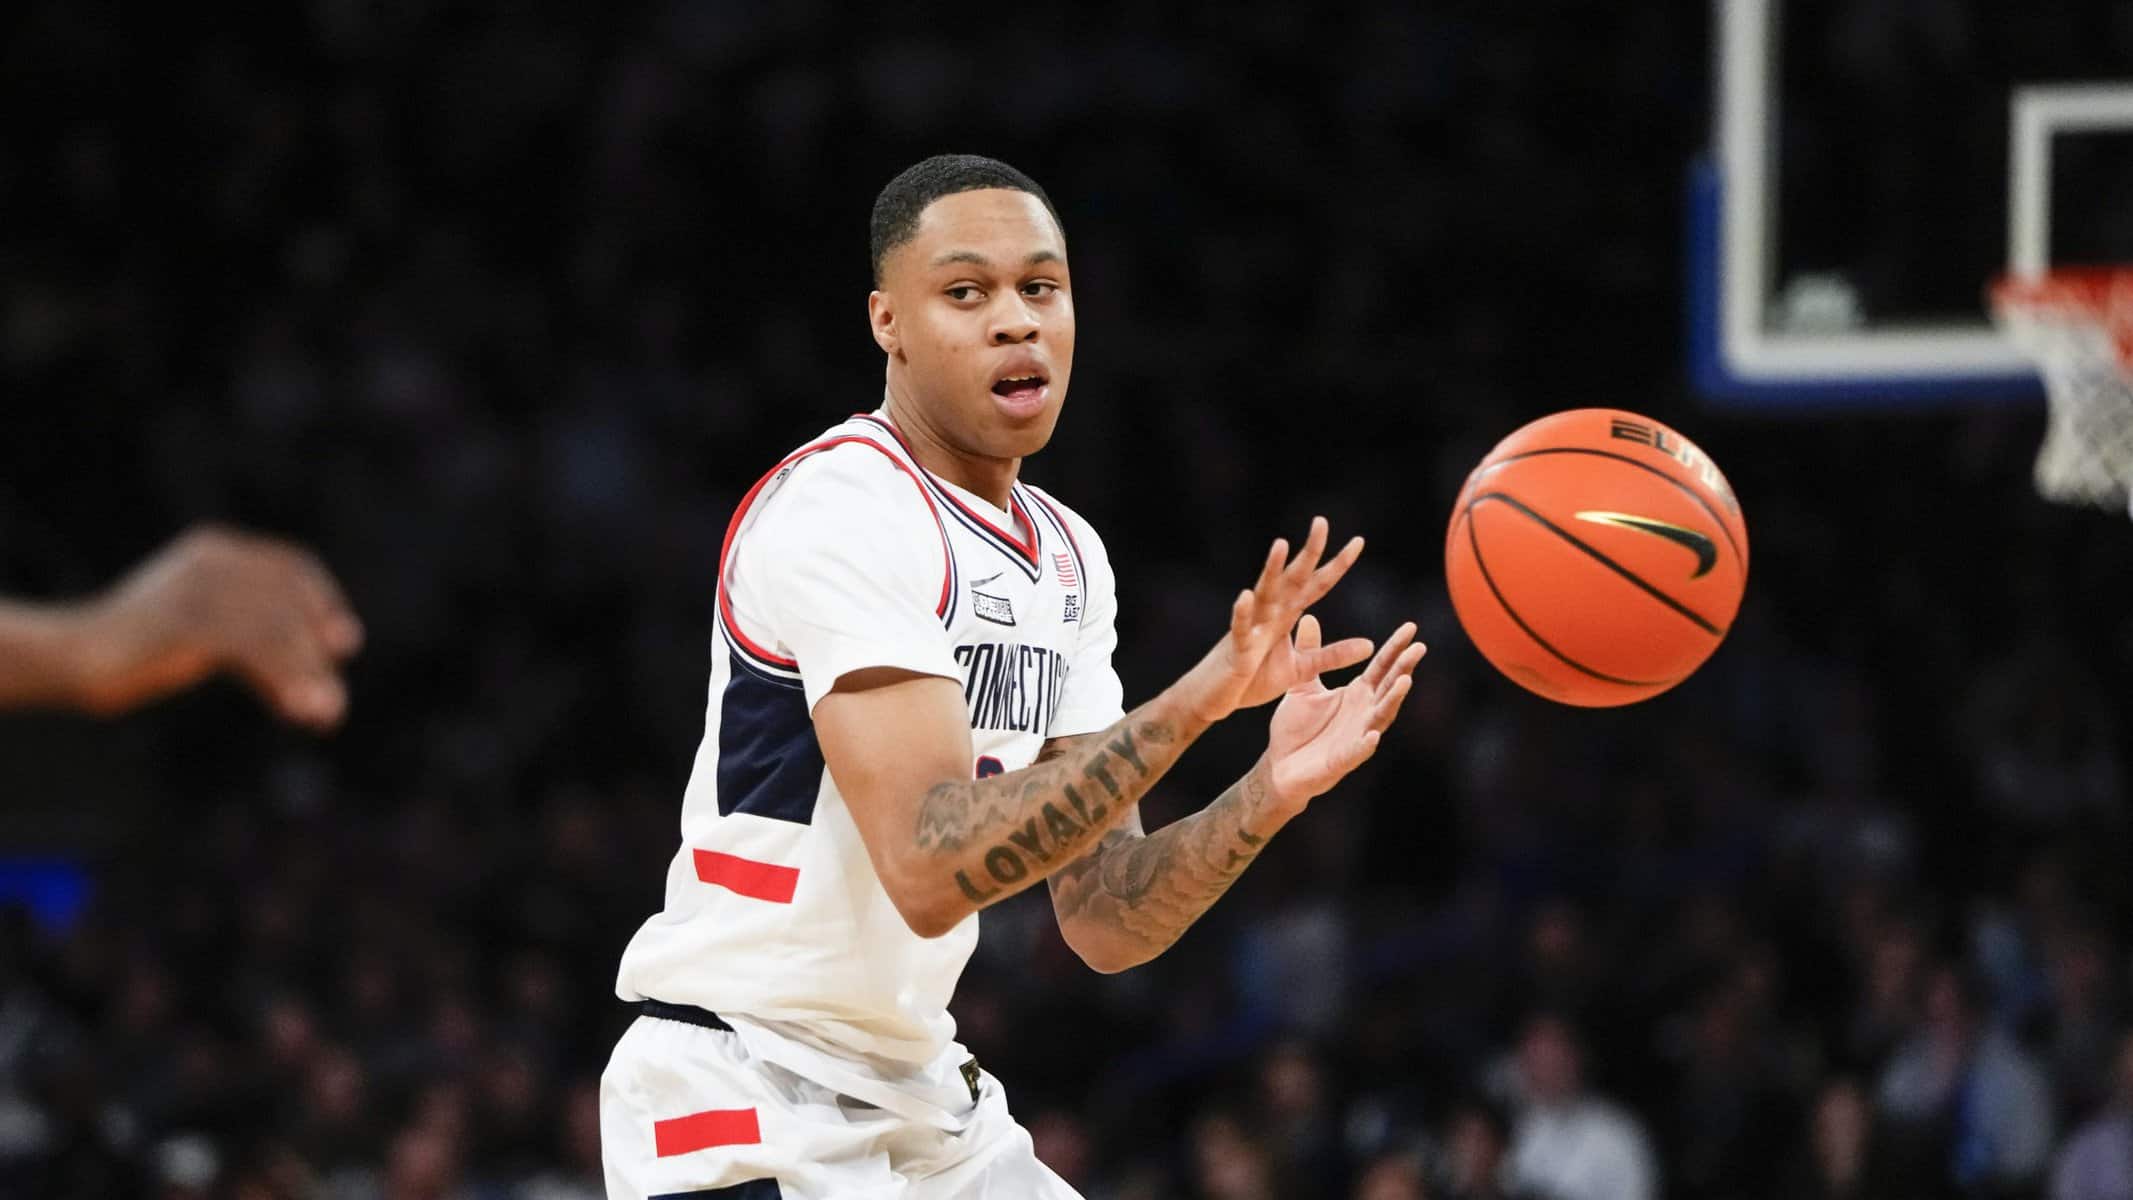 In our March Madness DFS value column, we break down the Final Four, featuring a matchup between Connecticut and Miami, plus...